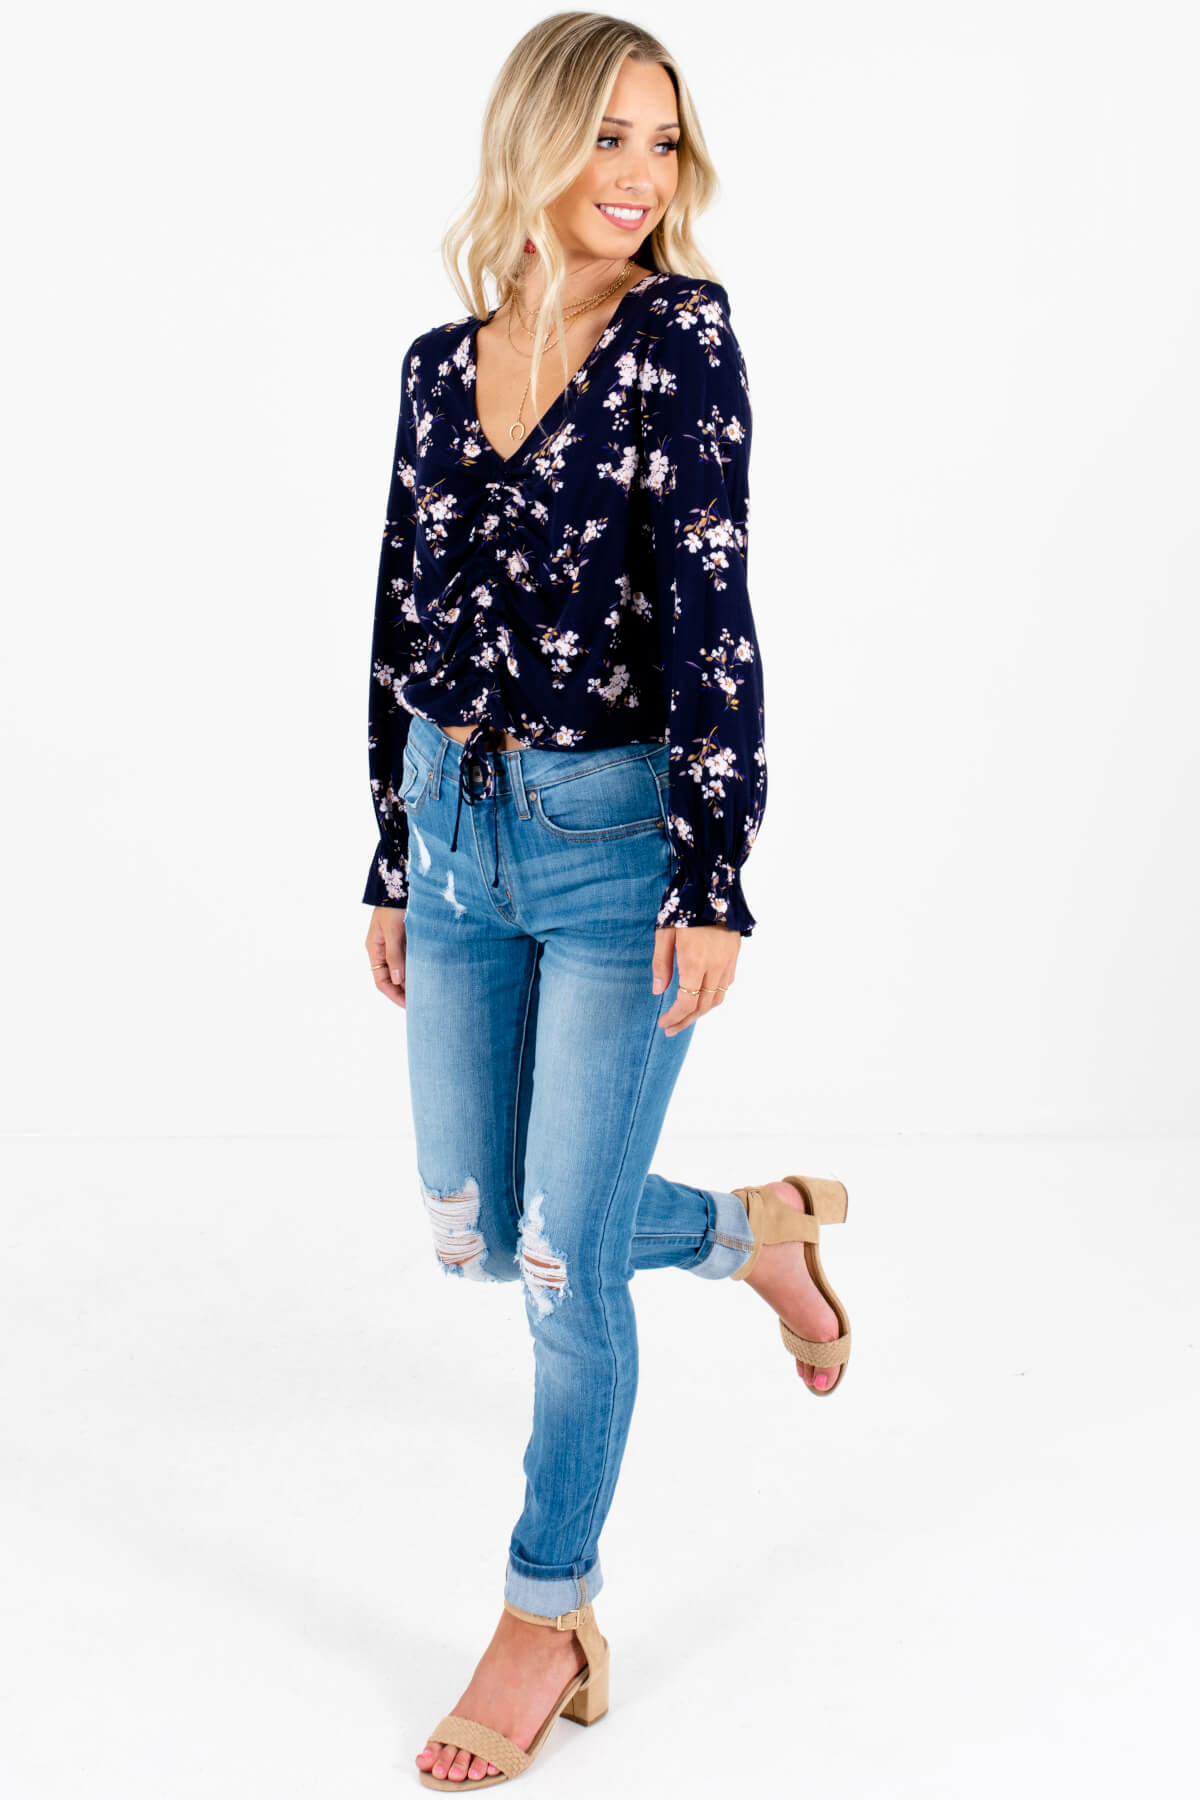 Navy Blue Cherry Blossom Floral Print Ruched Tops for Women